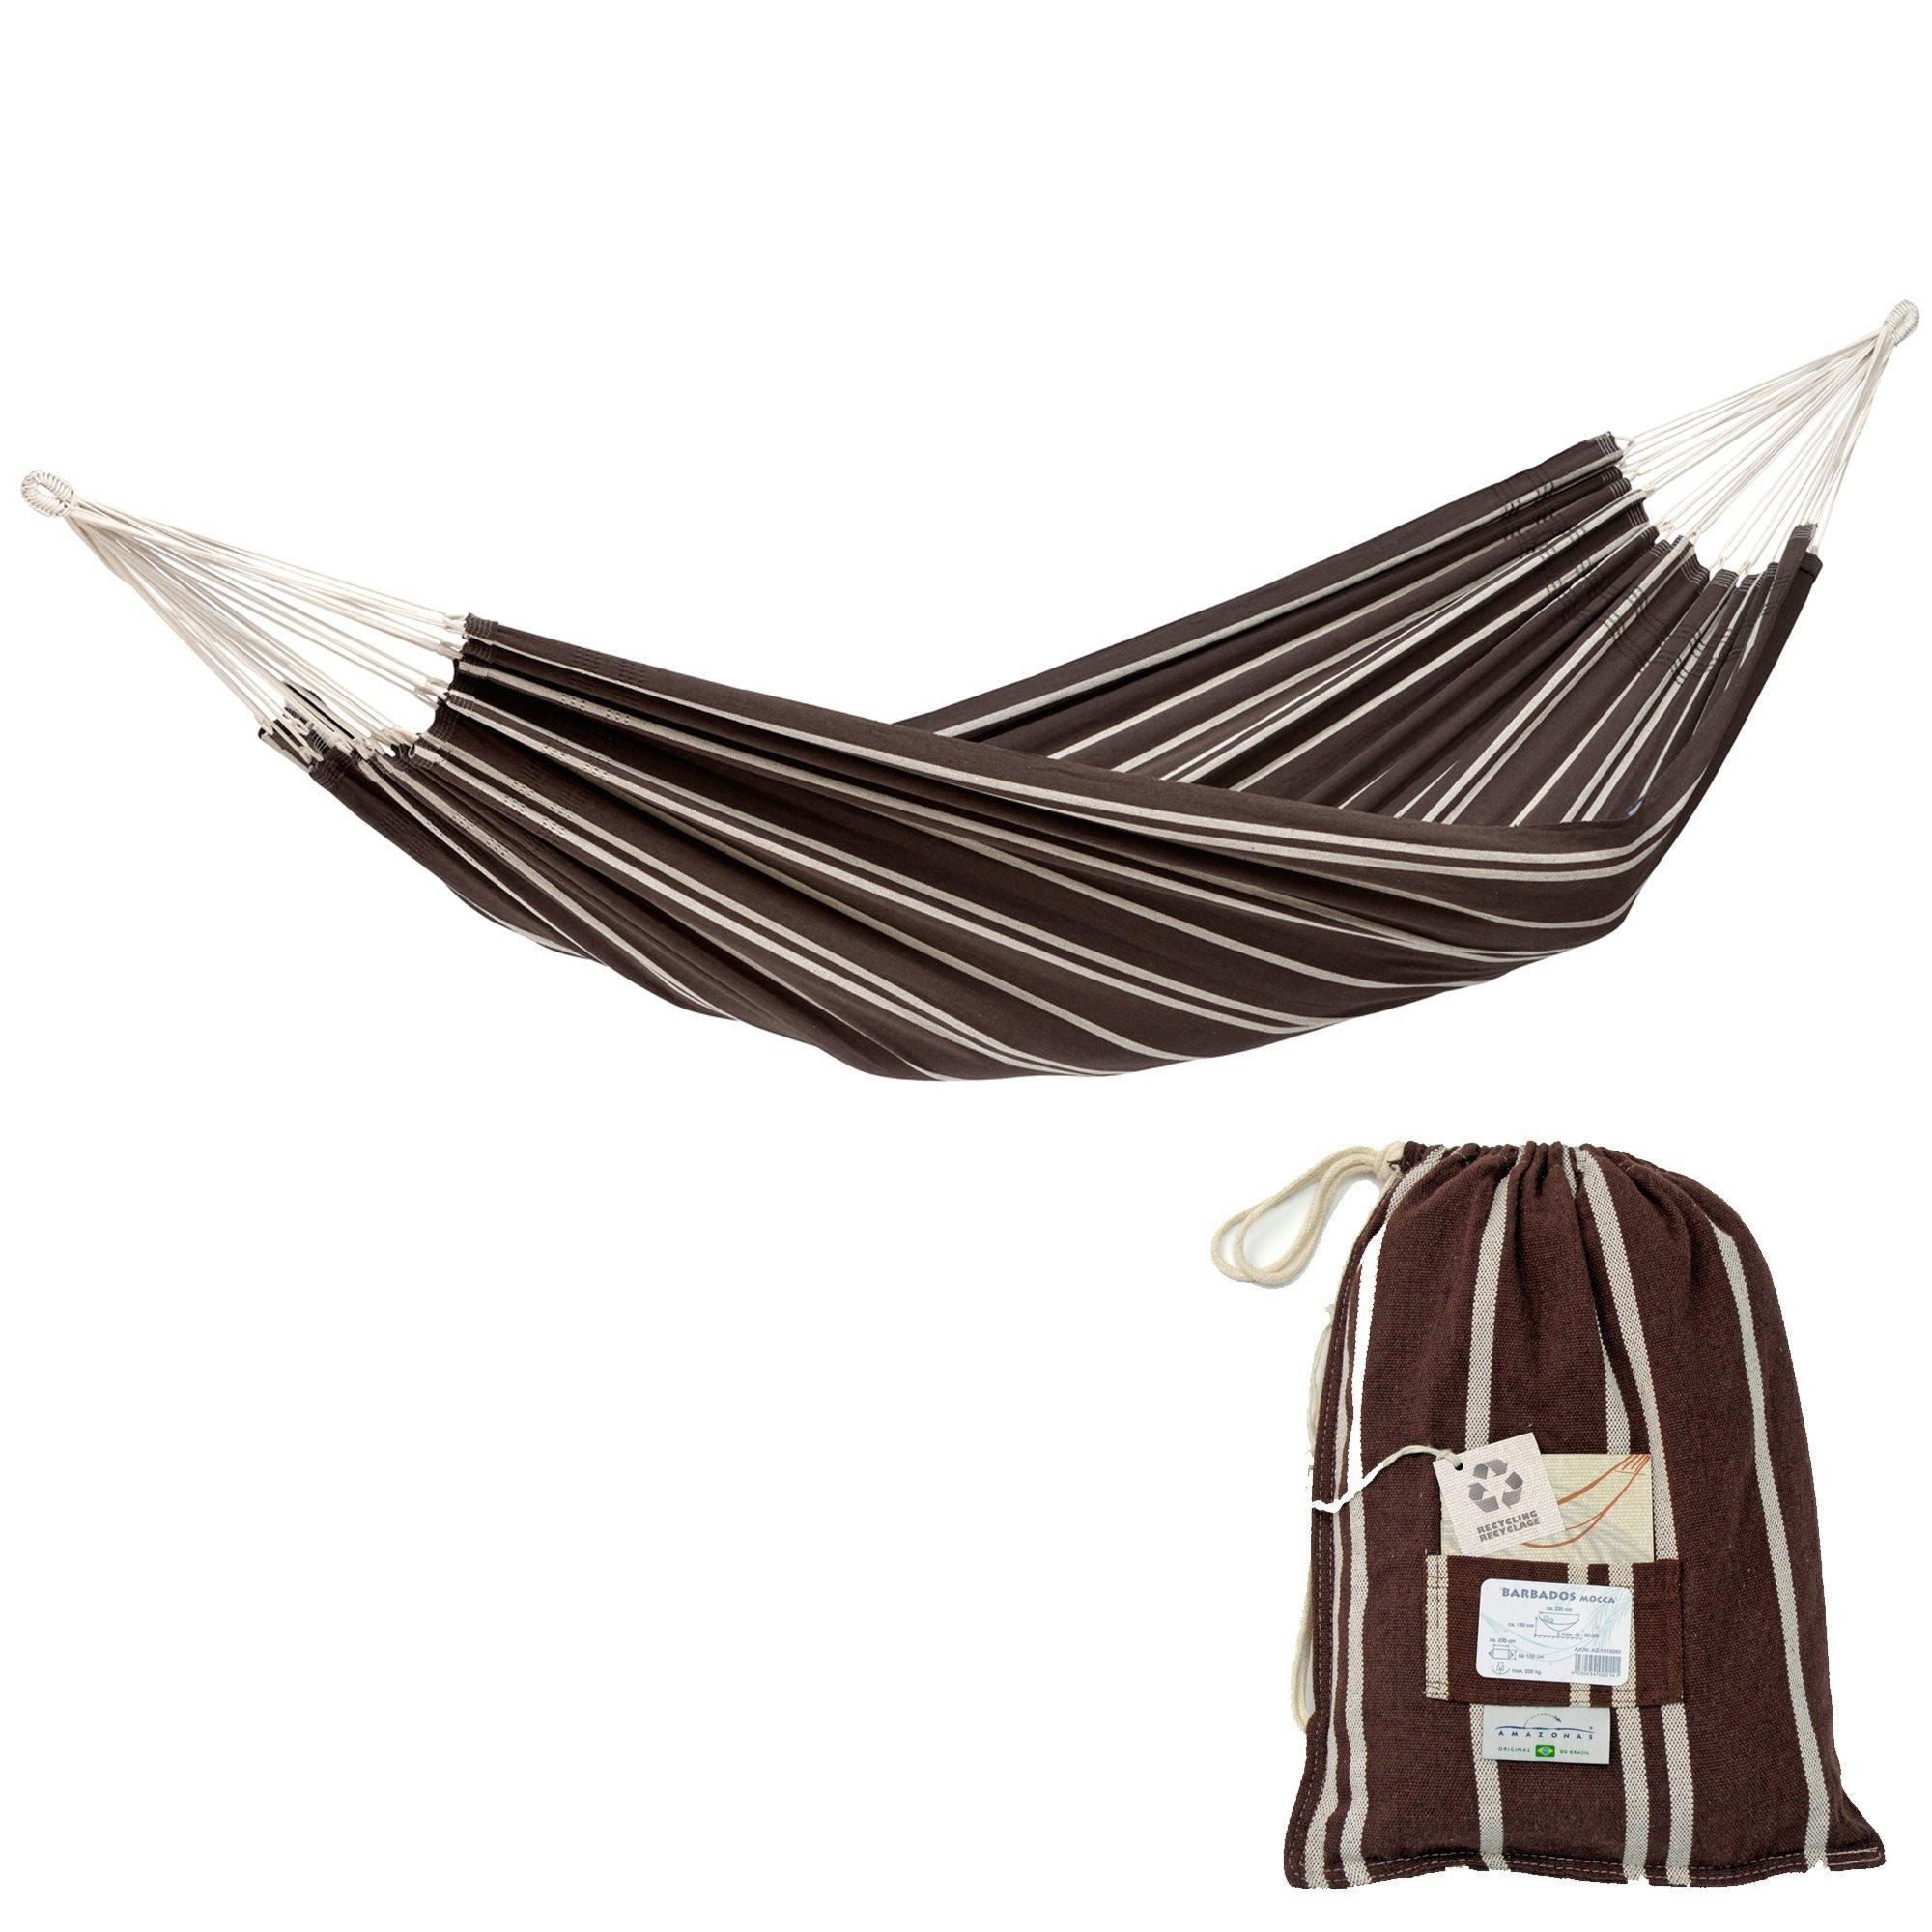 Amazonas Barbados Cotton Double 2 Seat/Person Sized Classic Garden Hammock With Bag -  Mocca - image 1